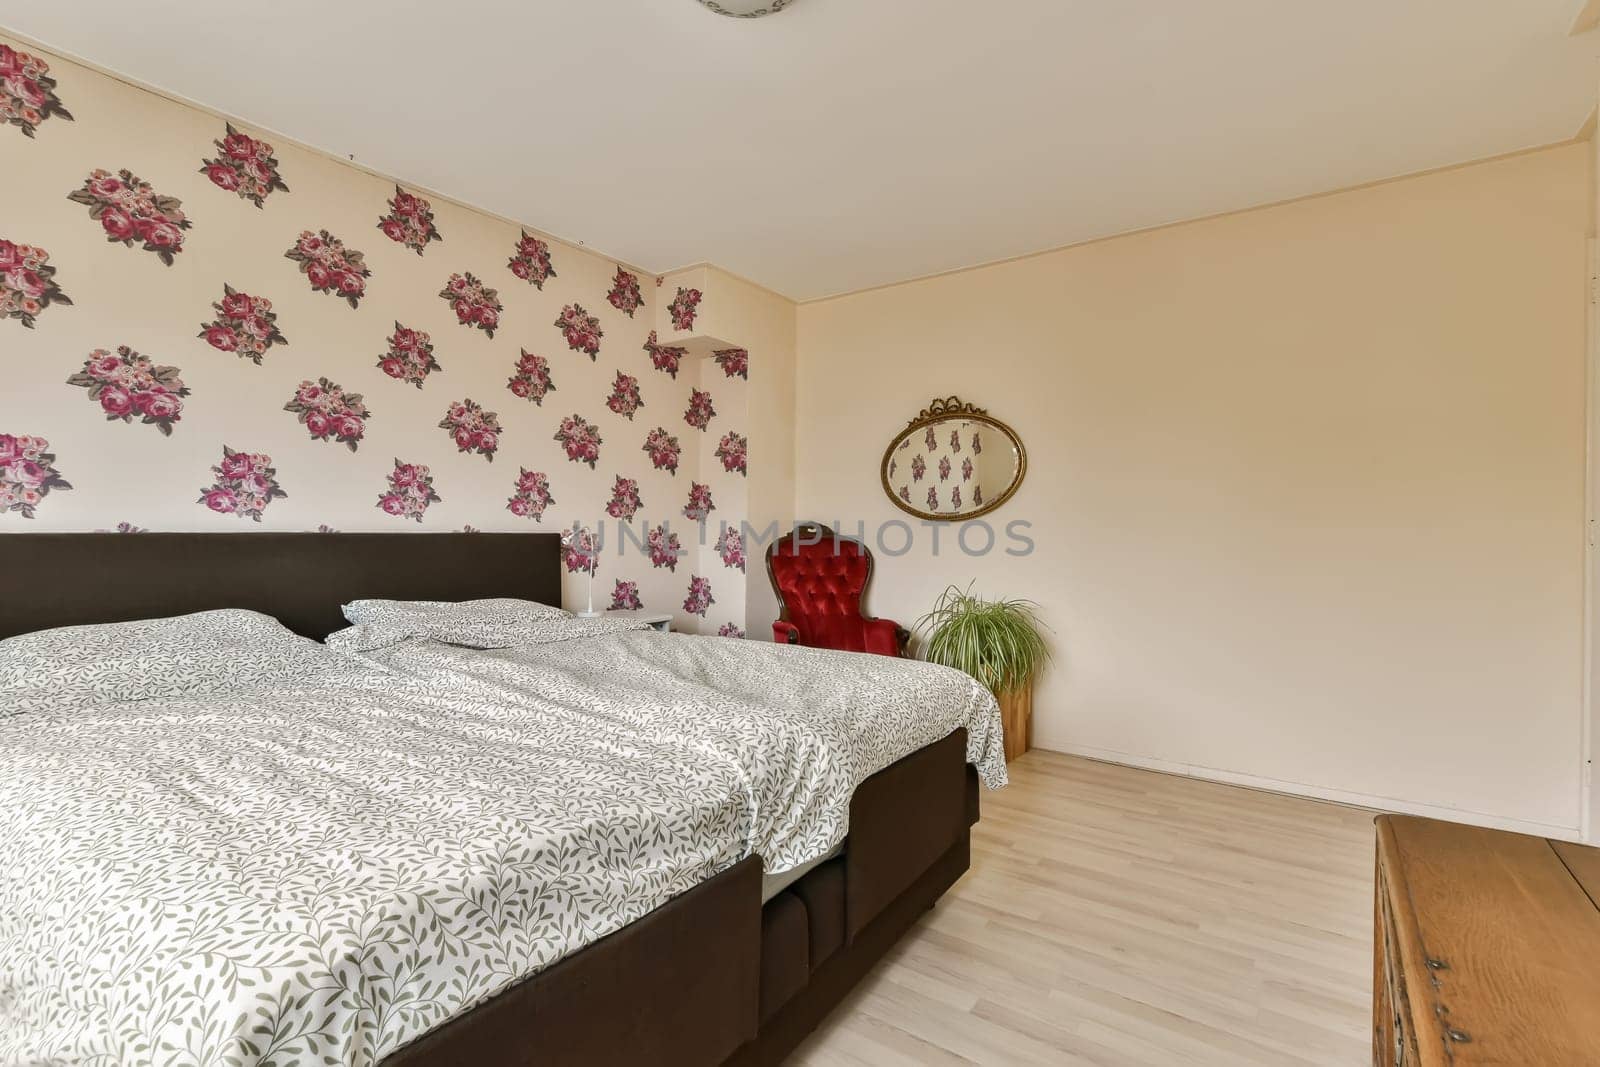 a bedroom with floral wallpaper on the walls and wood flooring in front of the bed, there is a mirror hanging above